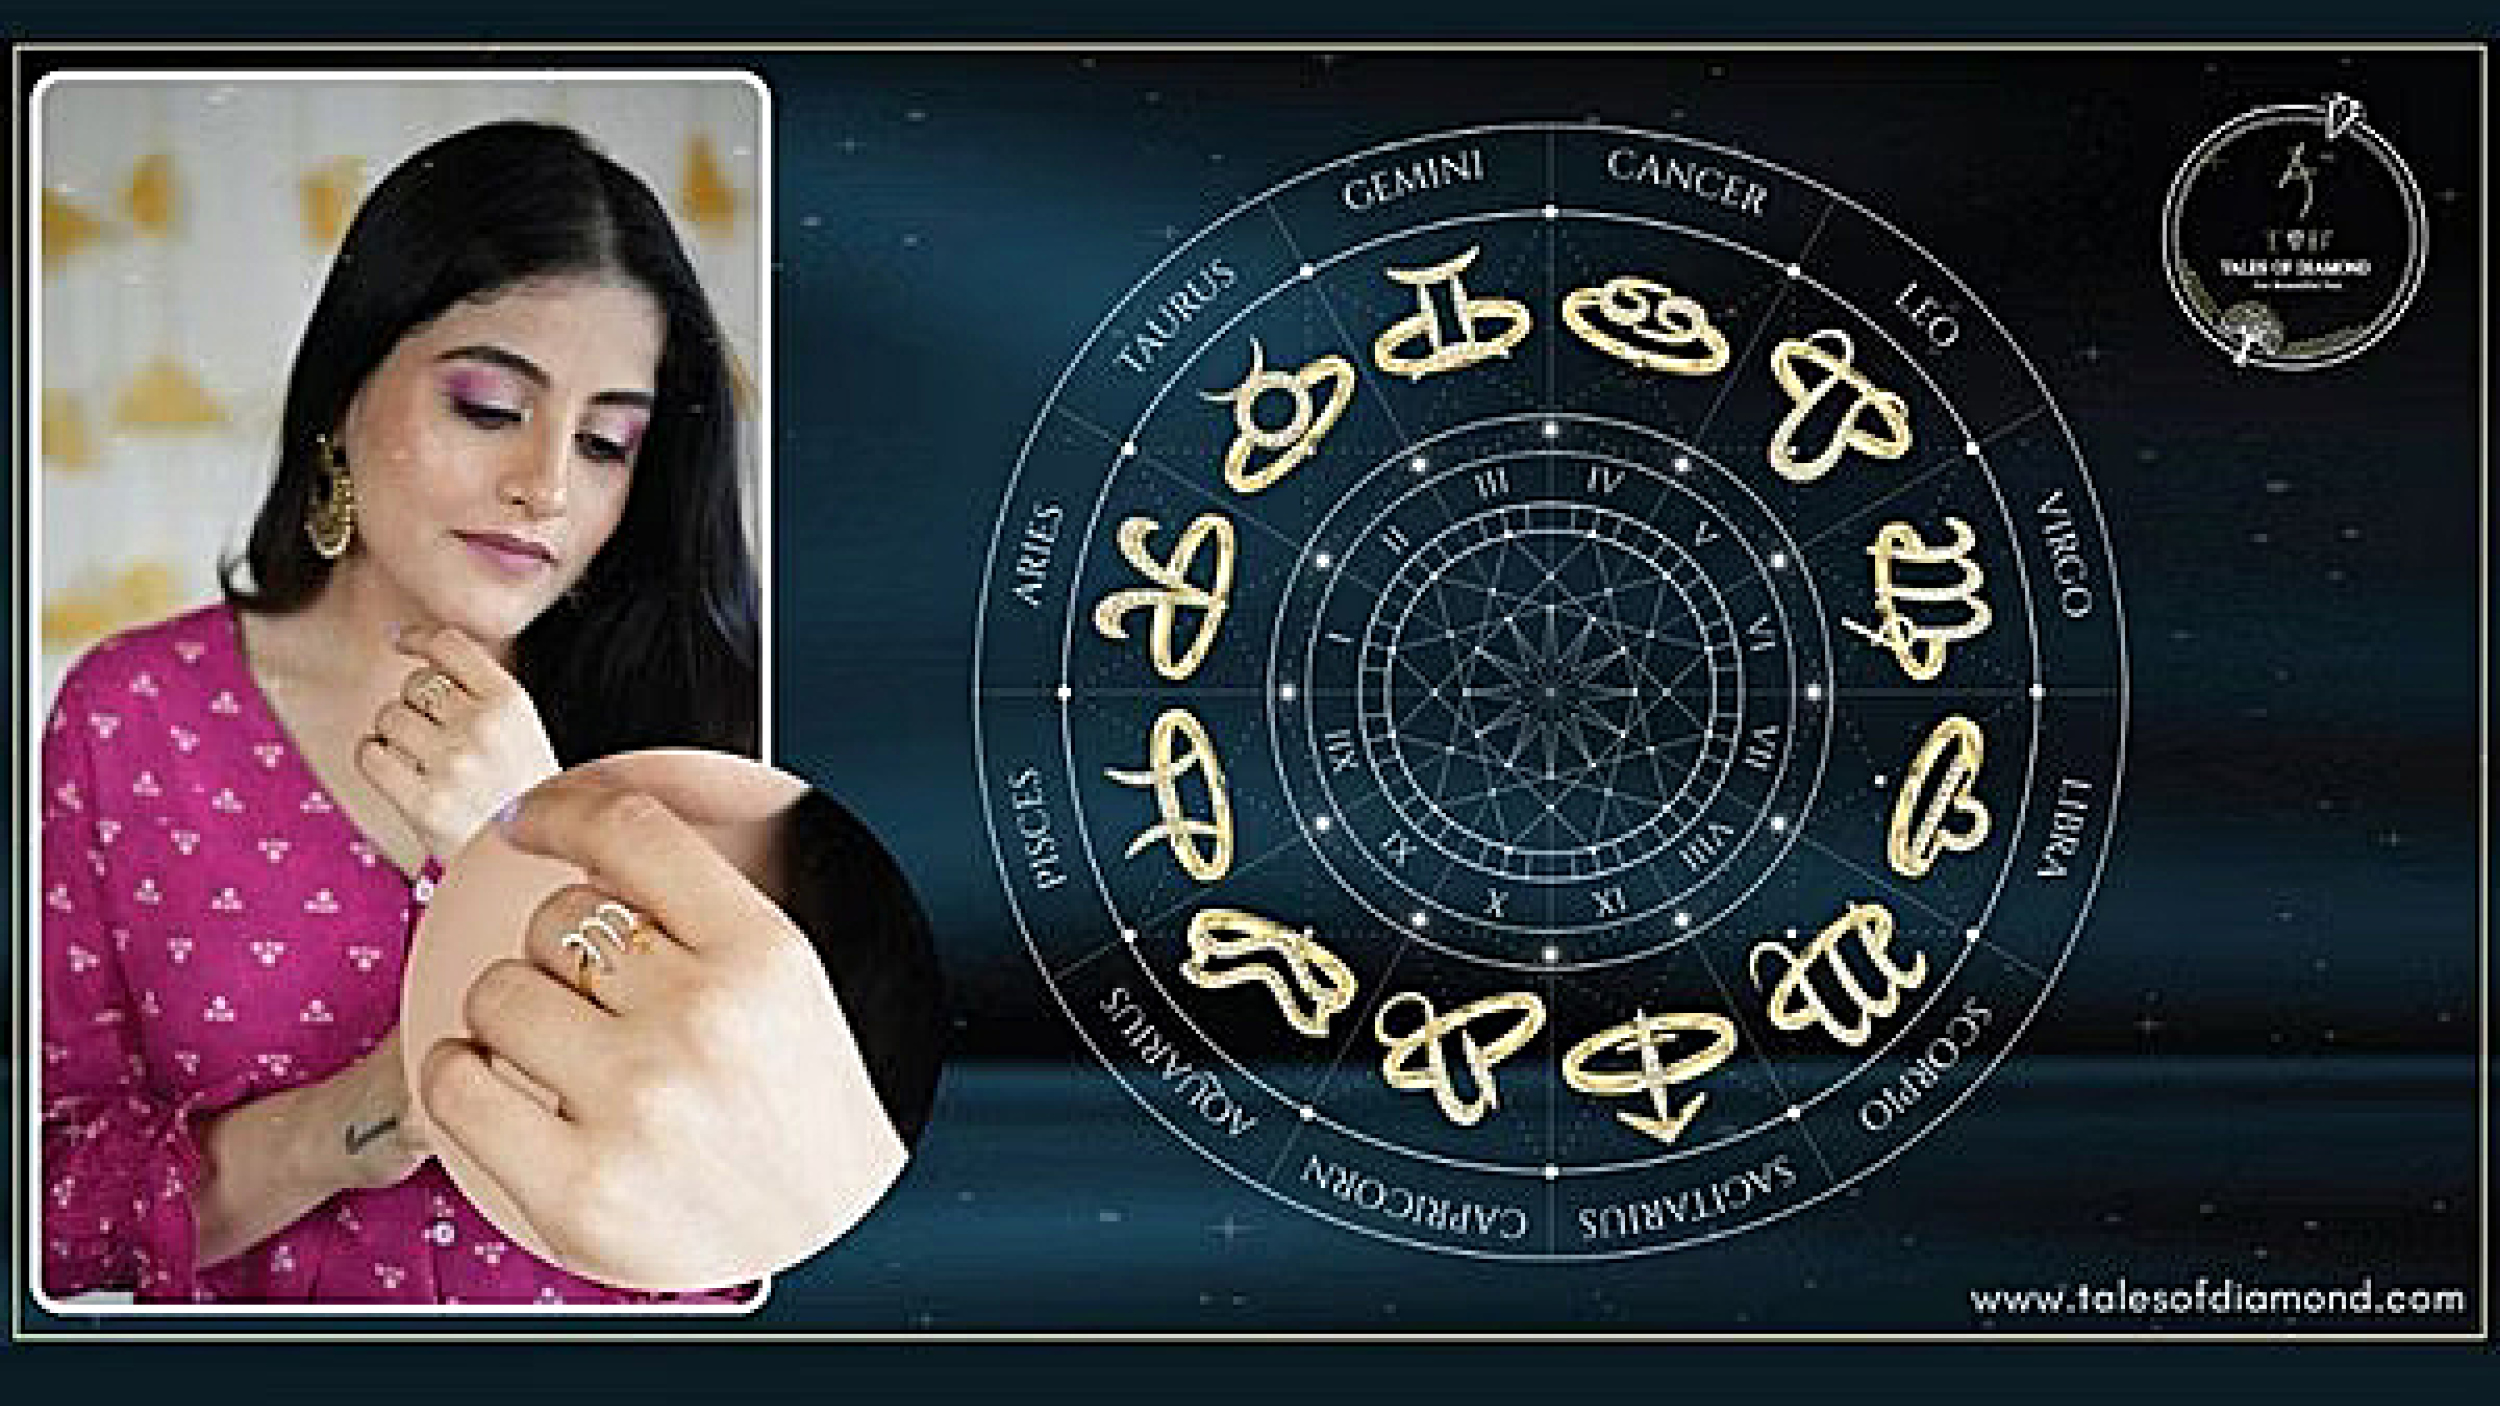 Tales of Diamond launch exquisite zodiac rings collection